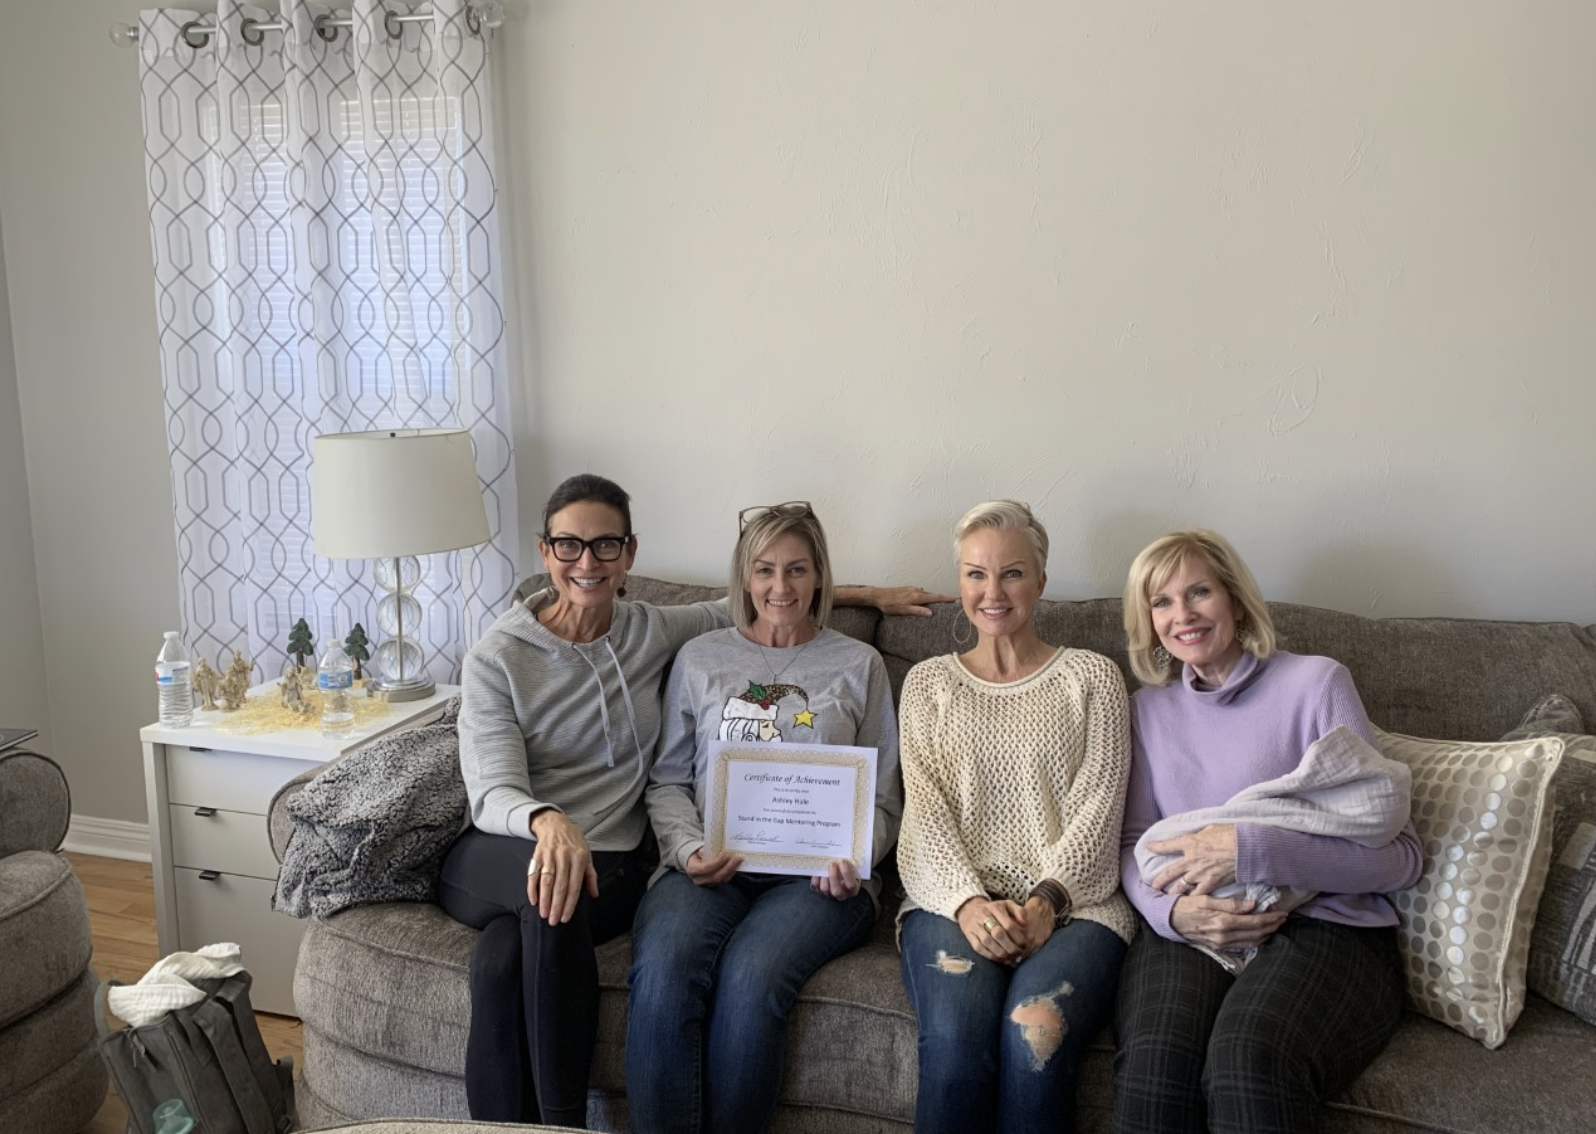 four women sitting on a couch together smiling while one holds up a certificate